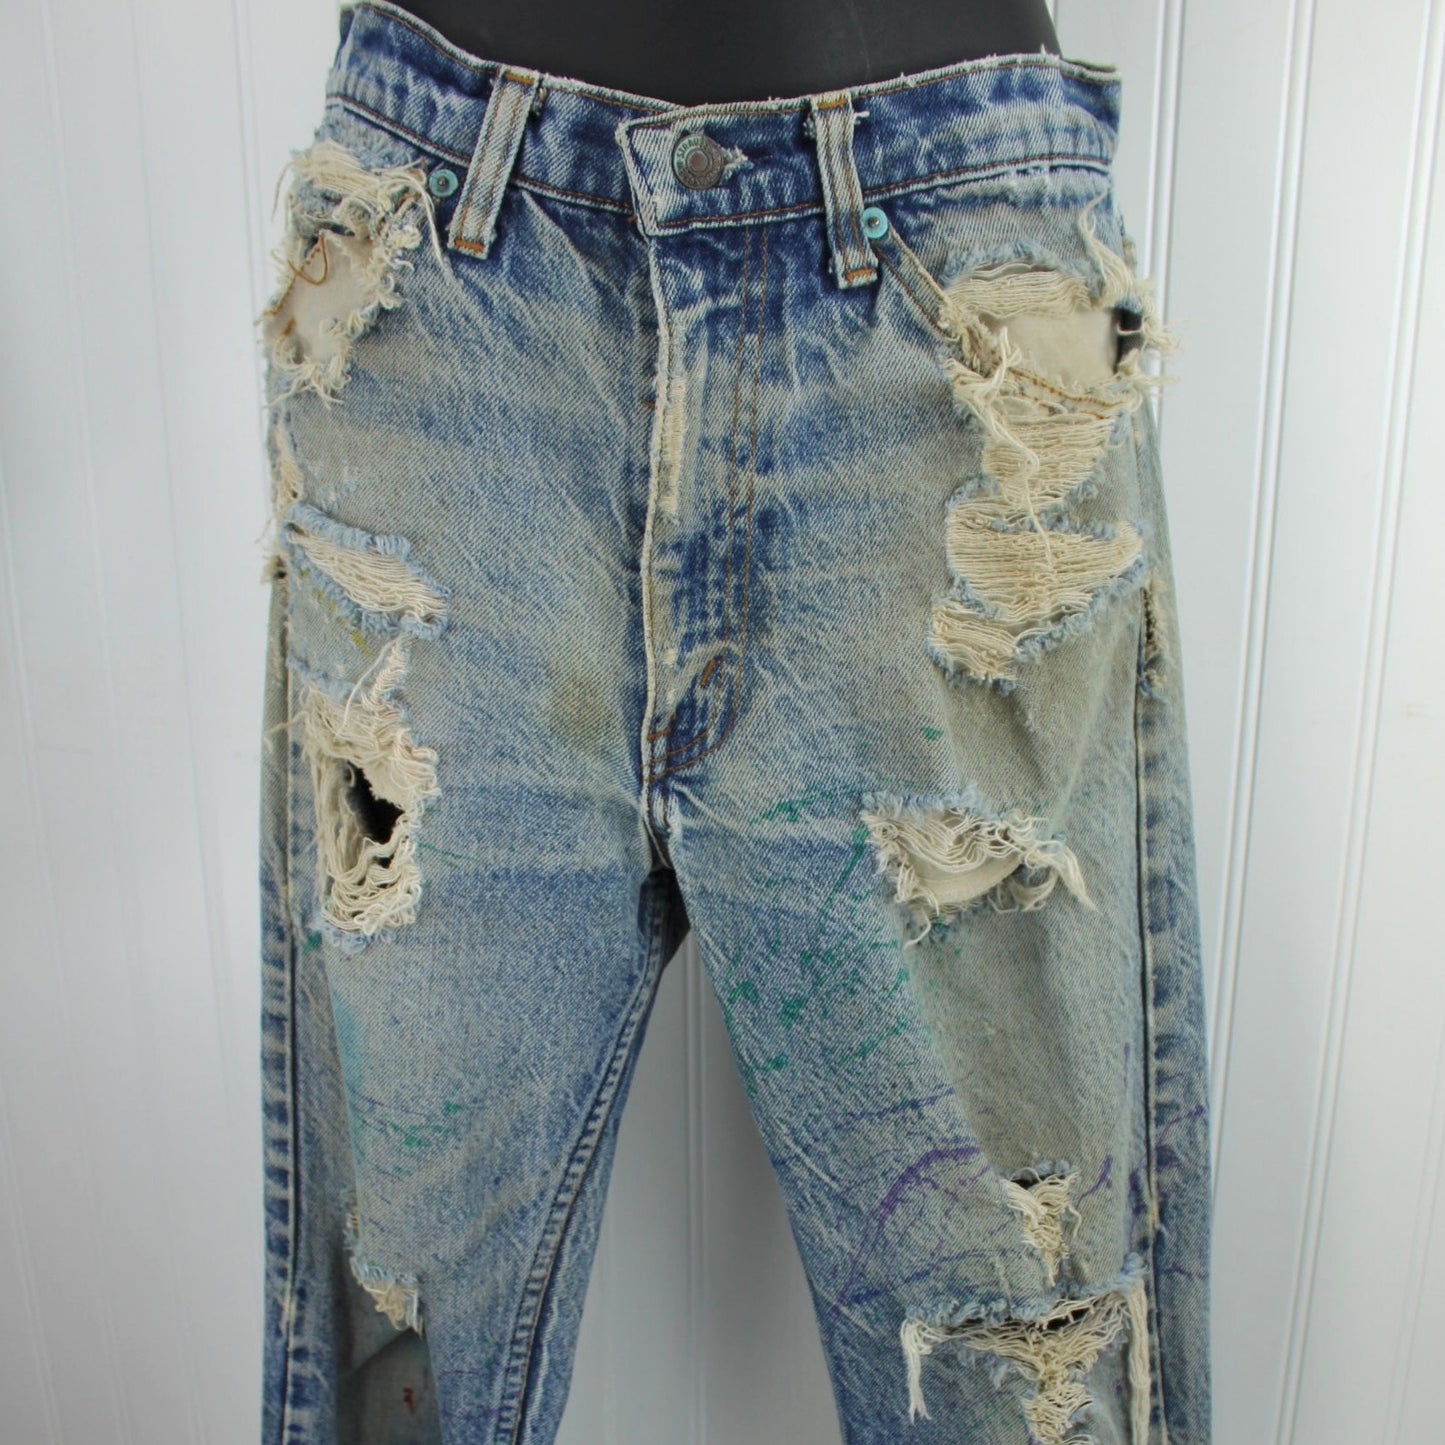 Vintage Levi's Skate Boarder Superbly Distressed Painted Jeans - Early 1990s - Waist 30" Orange Tab collectible